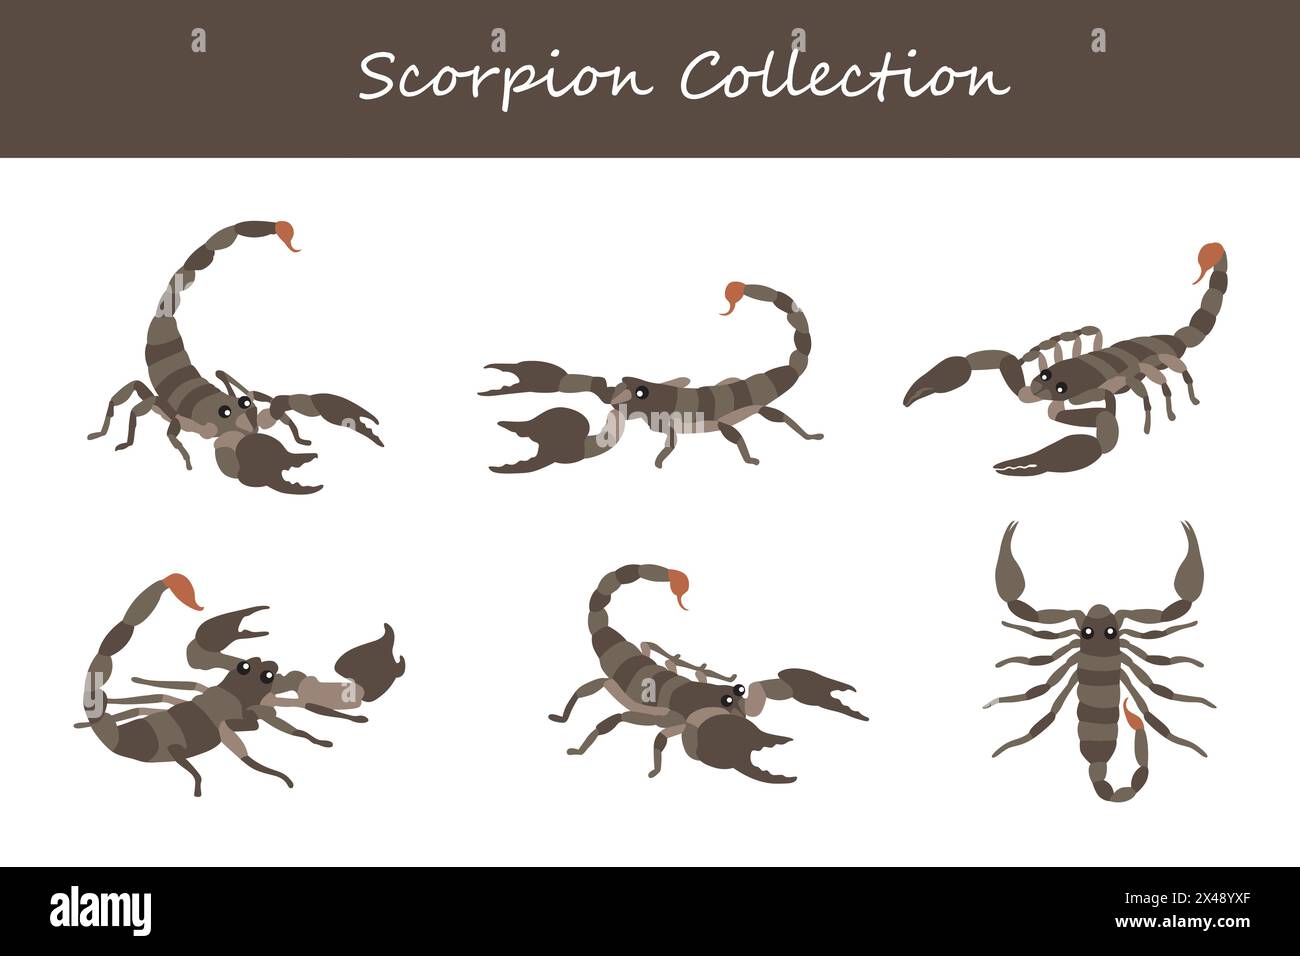 Scorpion collection. Scorpion in different poses. Vector illustration. Stock Vector